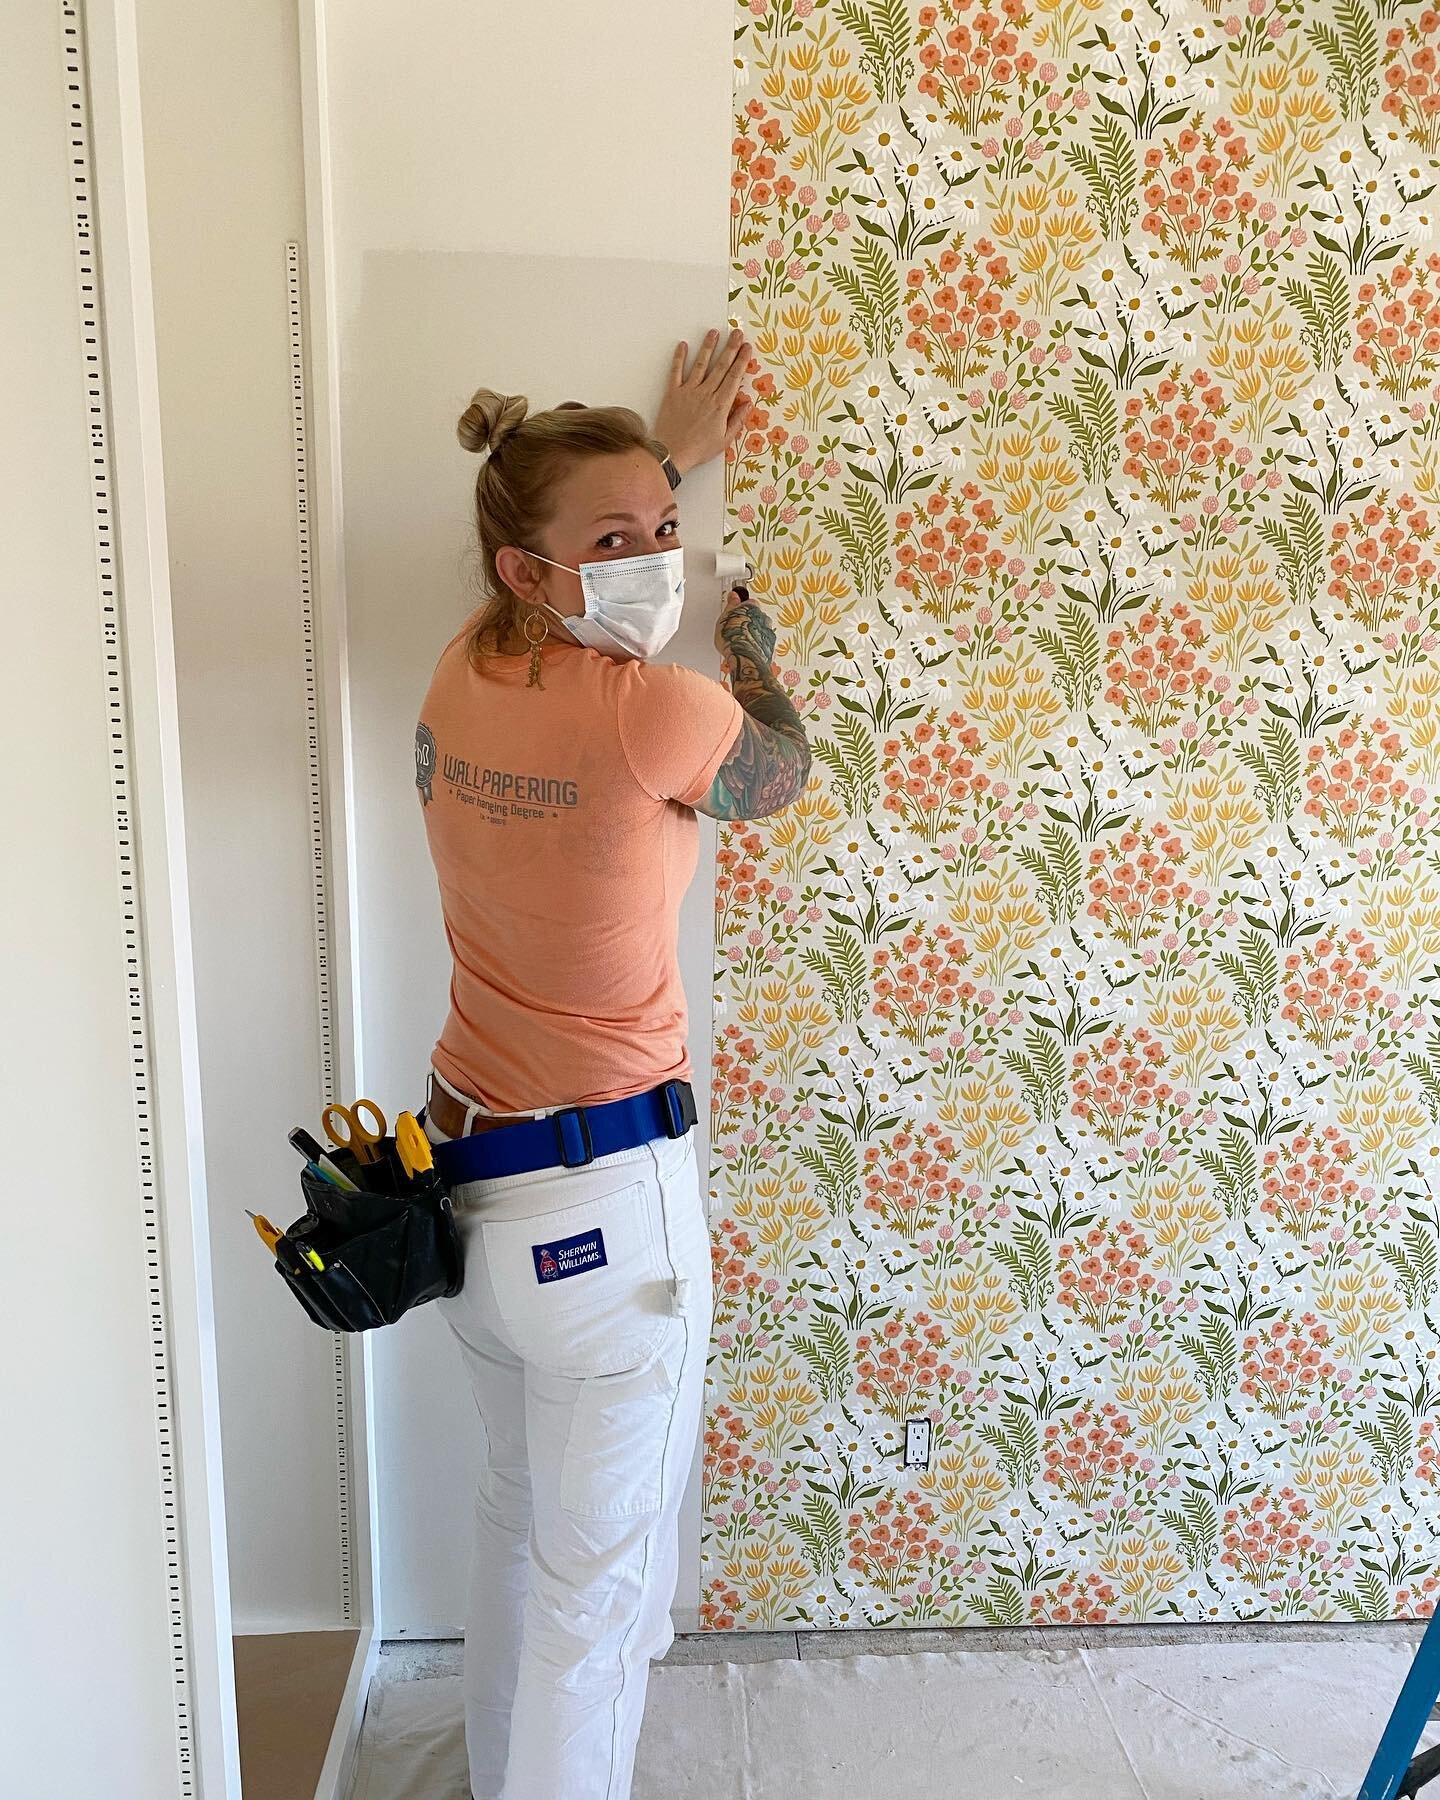 Love it when my work shirt happens to match the wallpaper I&rsquo;m installing 🌷💐🌷 this nursery is one step closer to completion ❤️